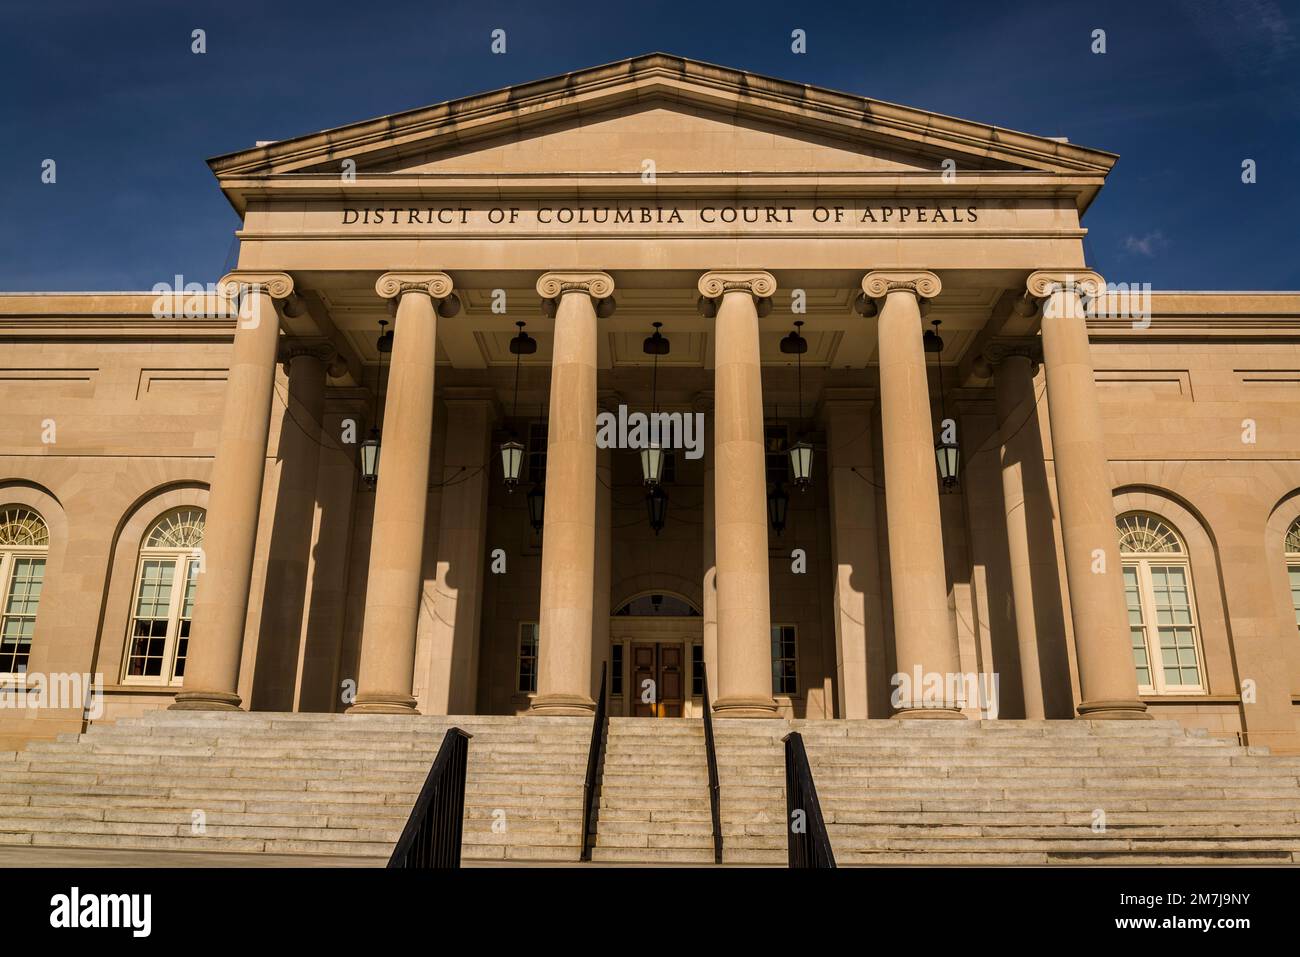 The District of Columbia Court of Appeals, located in the former D.C. City Hall, a National Historic Landmark, Washington, D.C., USA Stock Photo